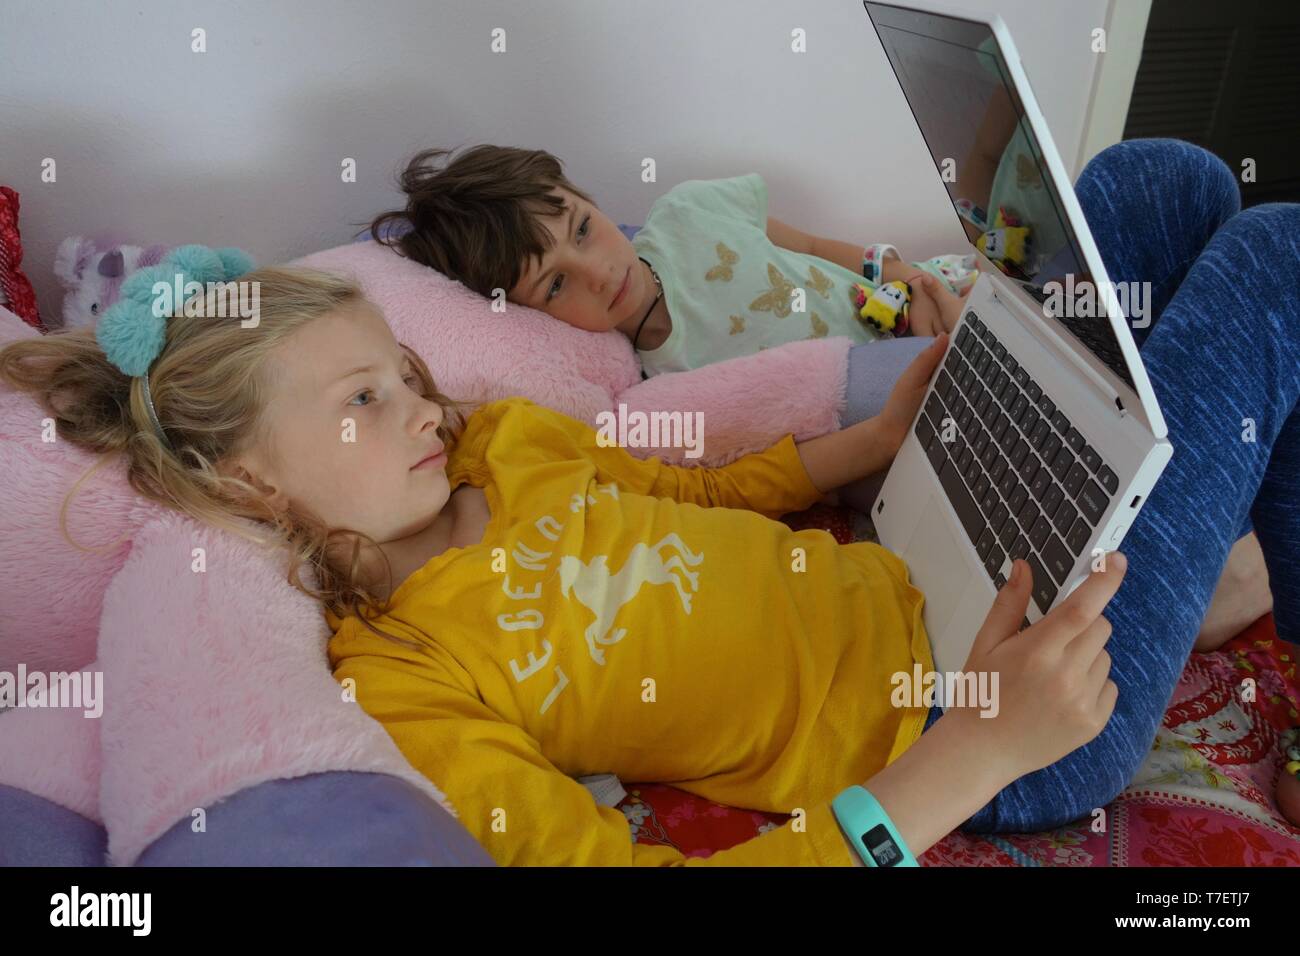 Two young girls laying on bed watching internet videos on a laptop Stock Photo